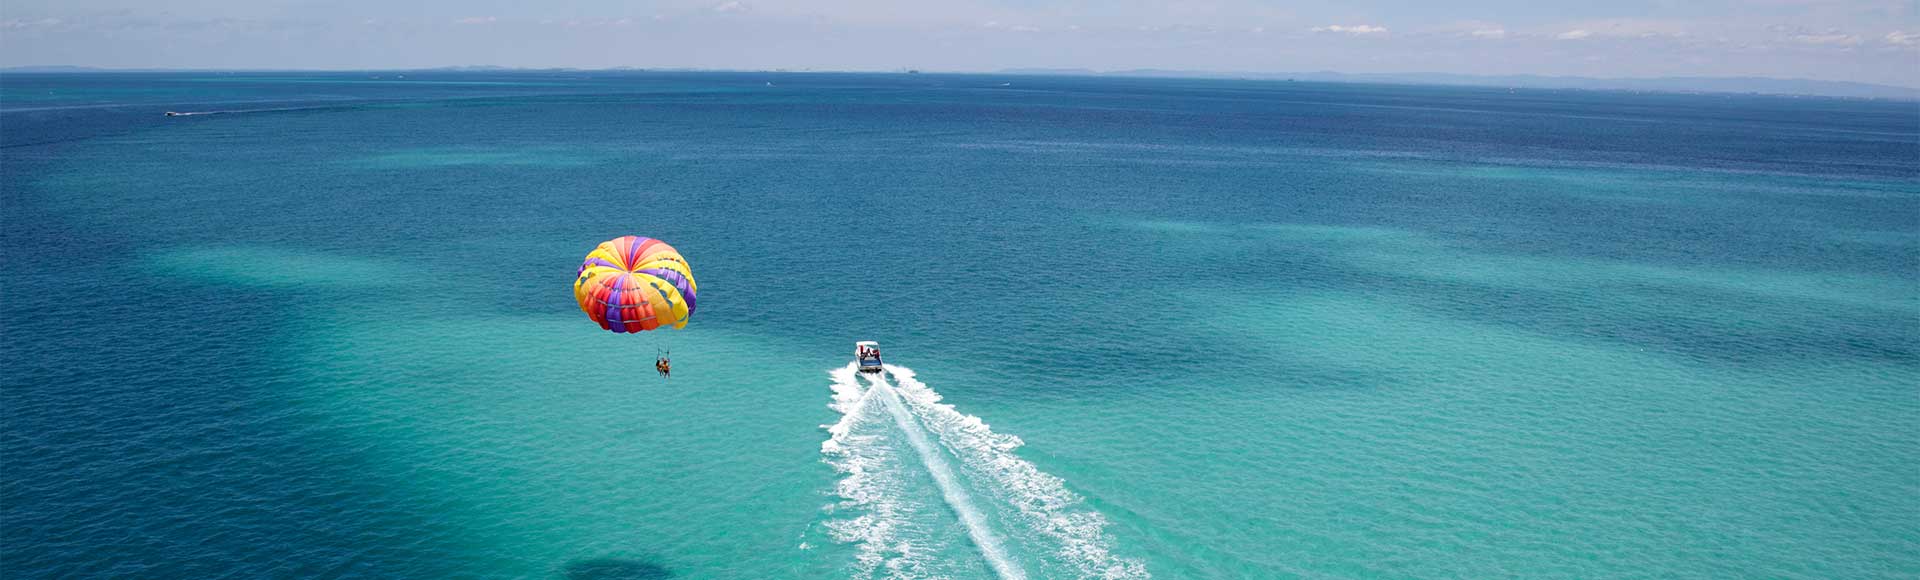 Parasailing in the Cayman Islands